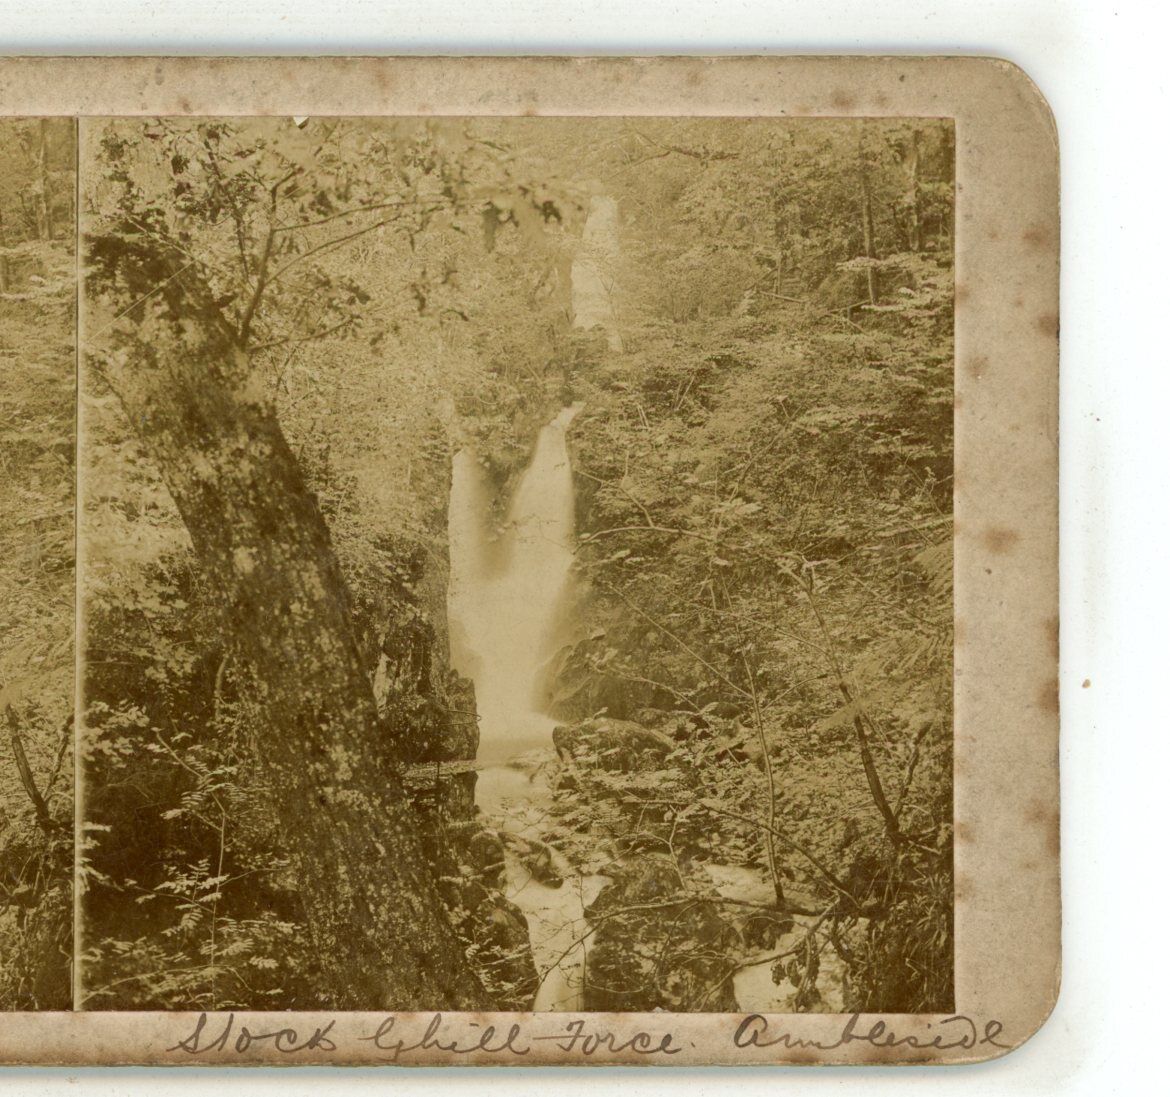 Stock Ghyll Force Ambleside England Stereoview